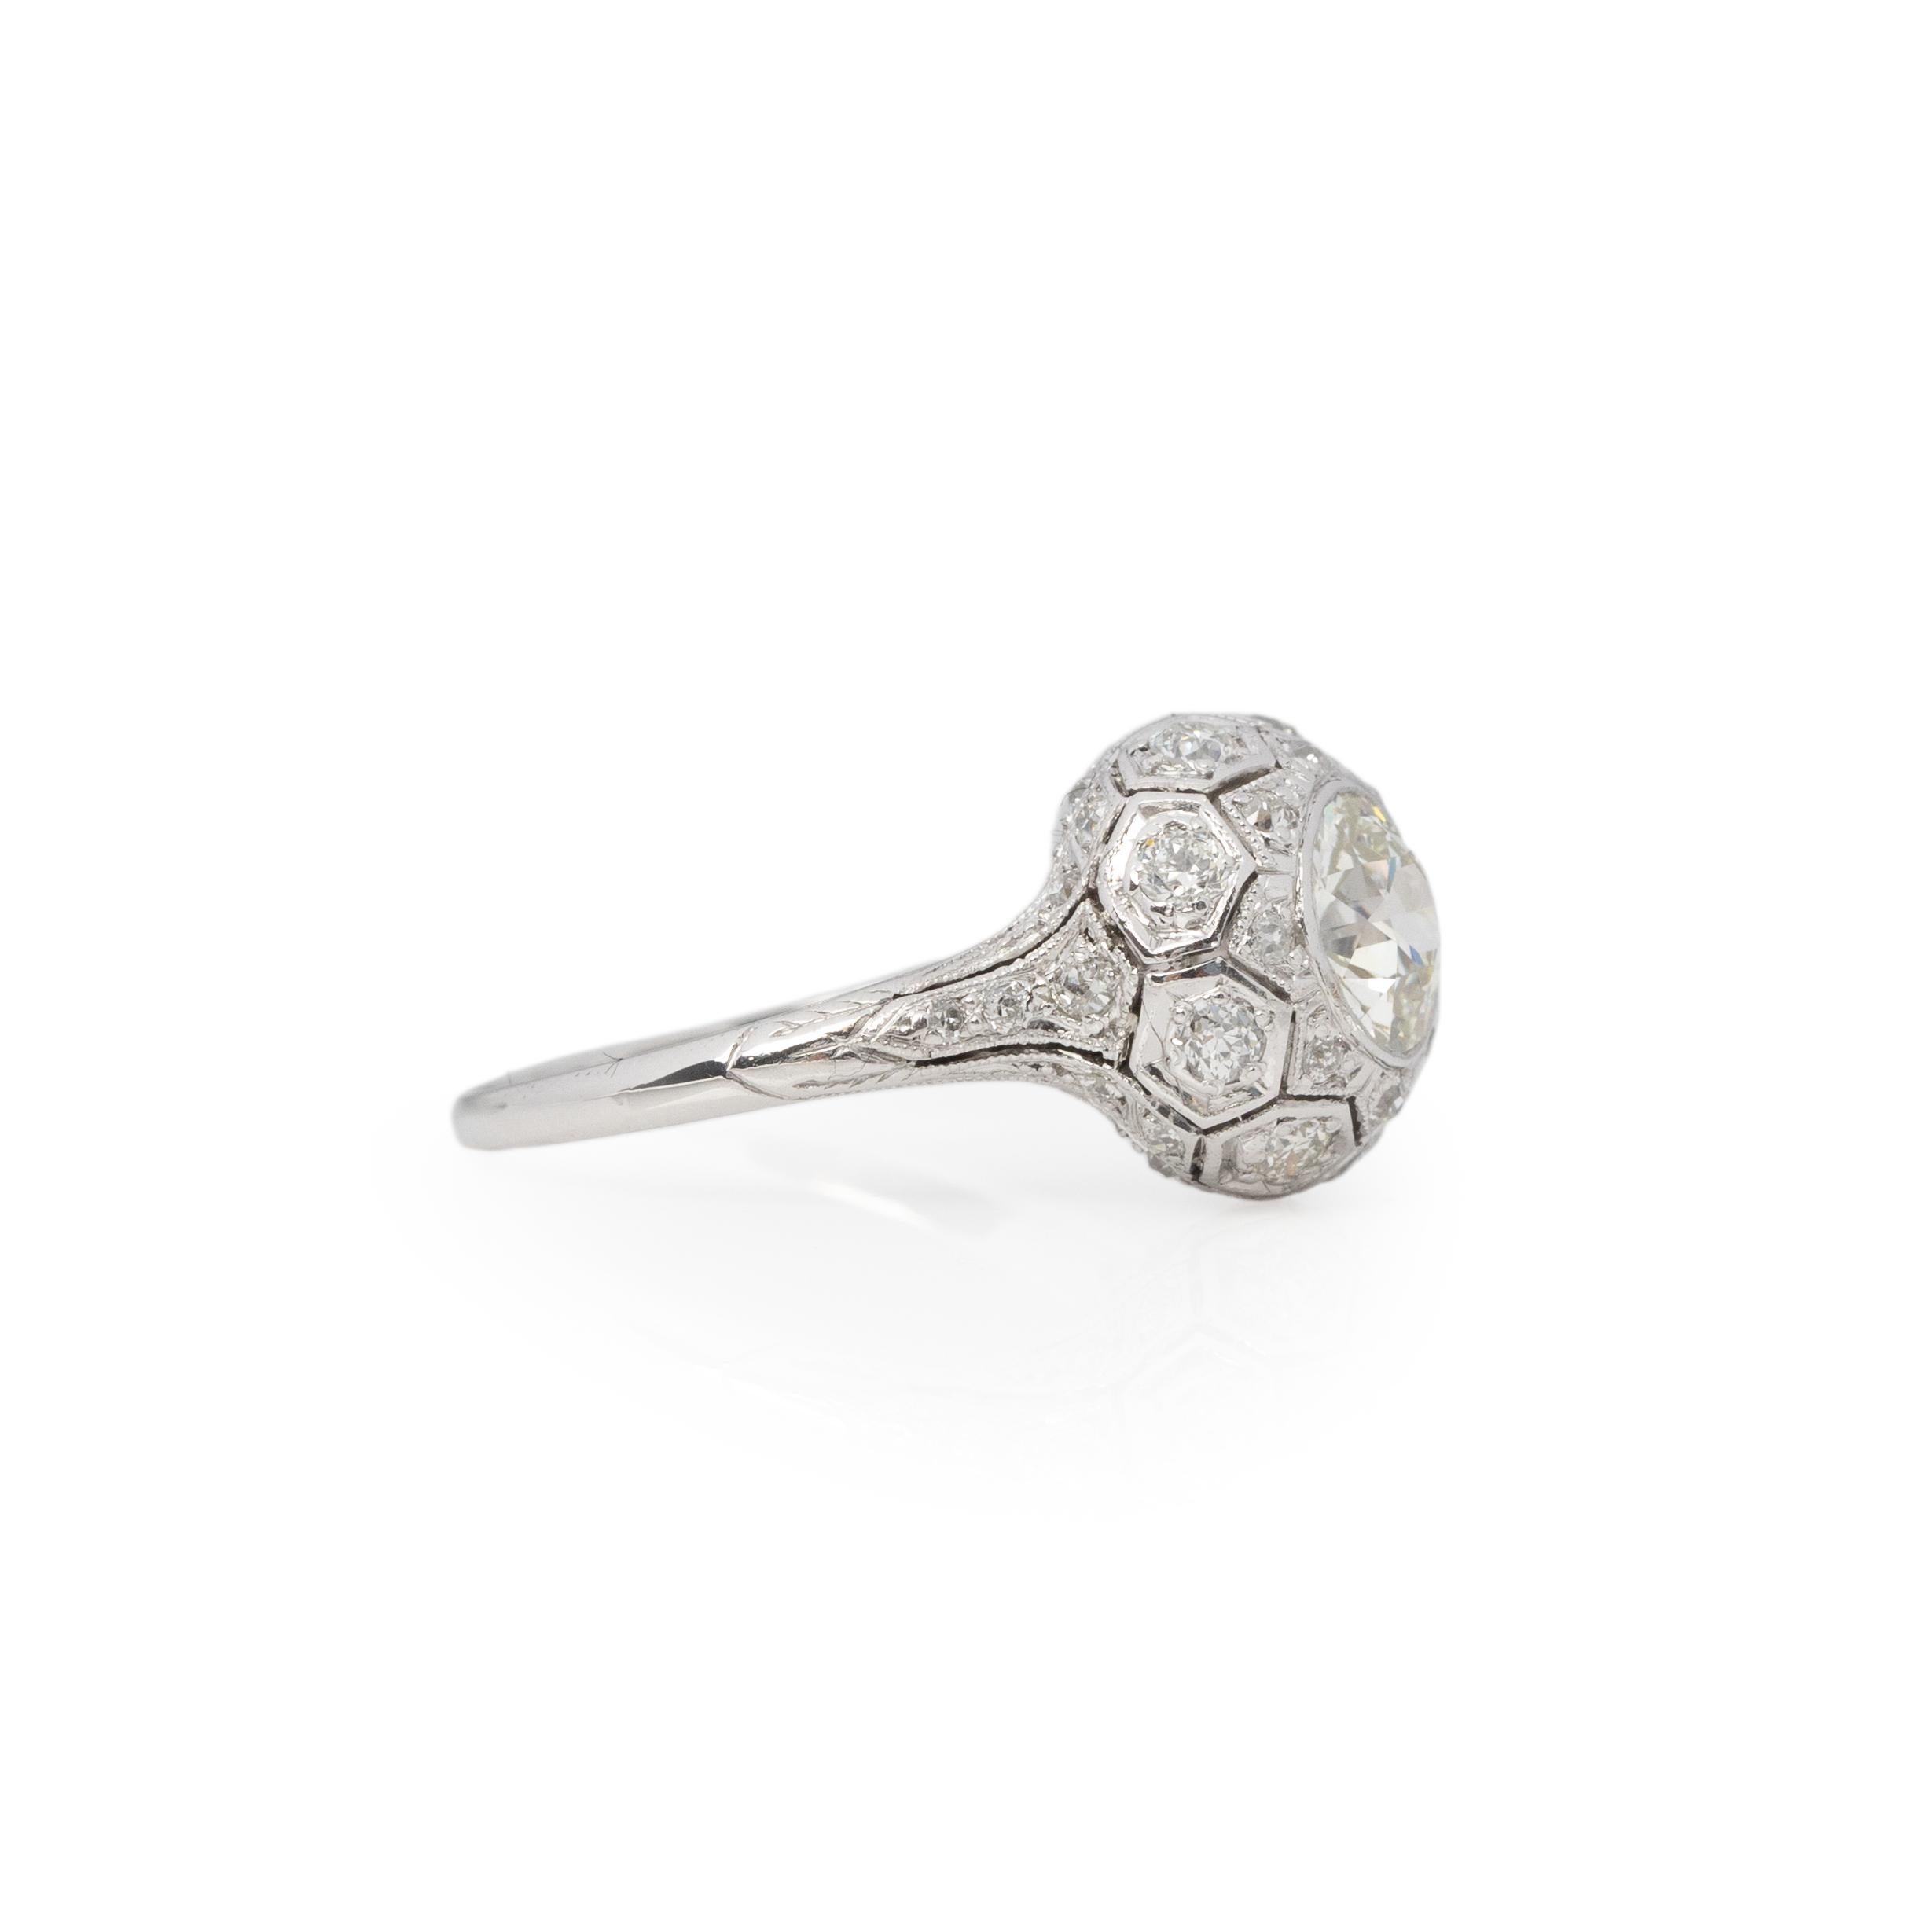 Perfect for any vintage jewelry lover in your life. This platinum Art Deco ring has outstanding details and thoughtful design. Atop the tapered shanks is a elegant dome shape, giving all the disco ball vibes with the encrusted diamonds. Making up